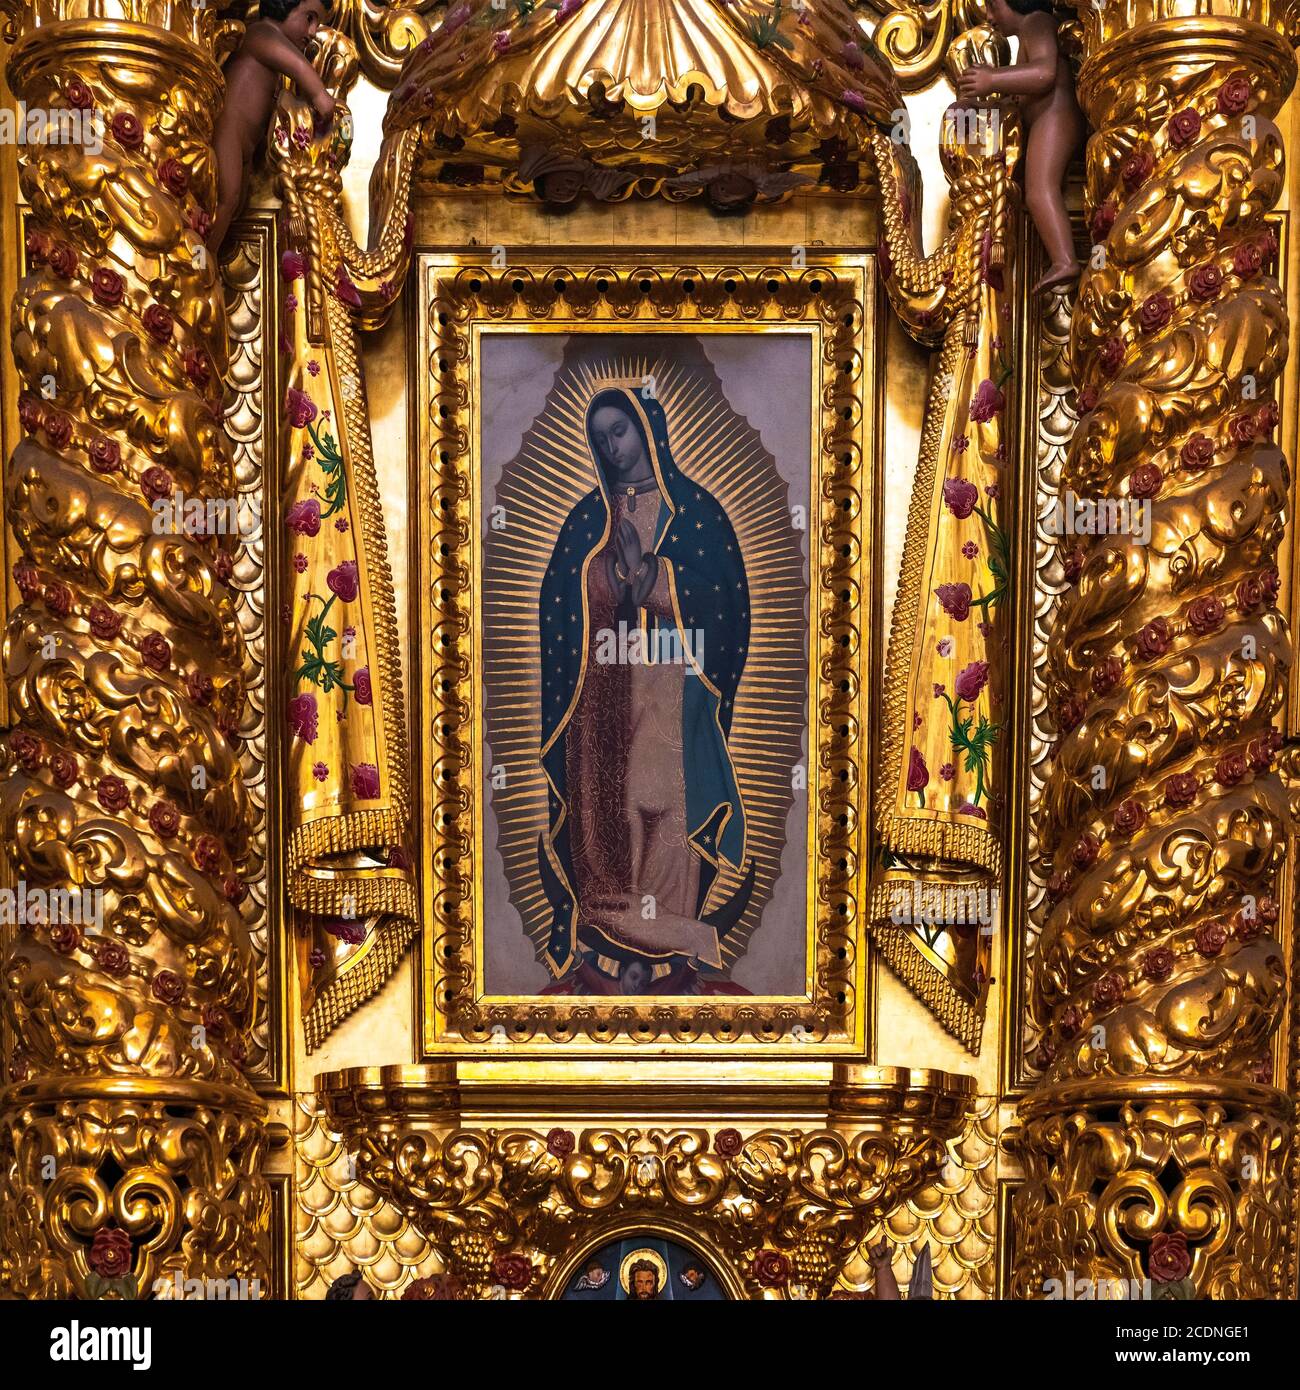 Virgin Mary Lady Of Guadalupe Statue From Mexico Lagoagrio Gob Ec